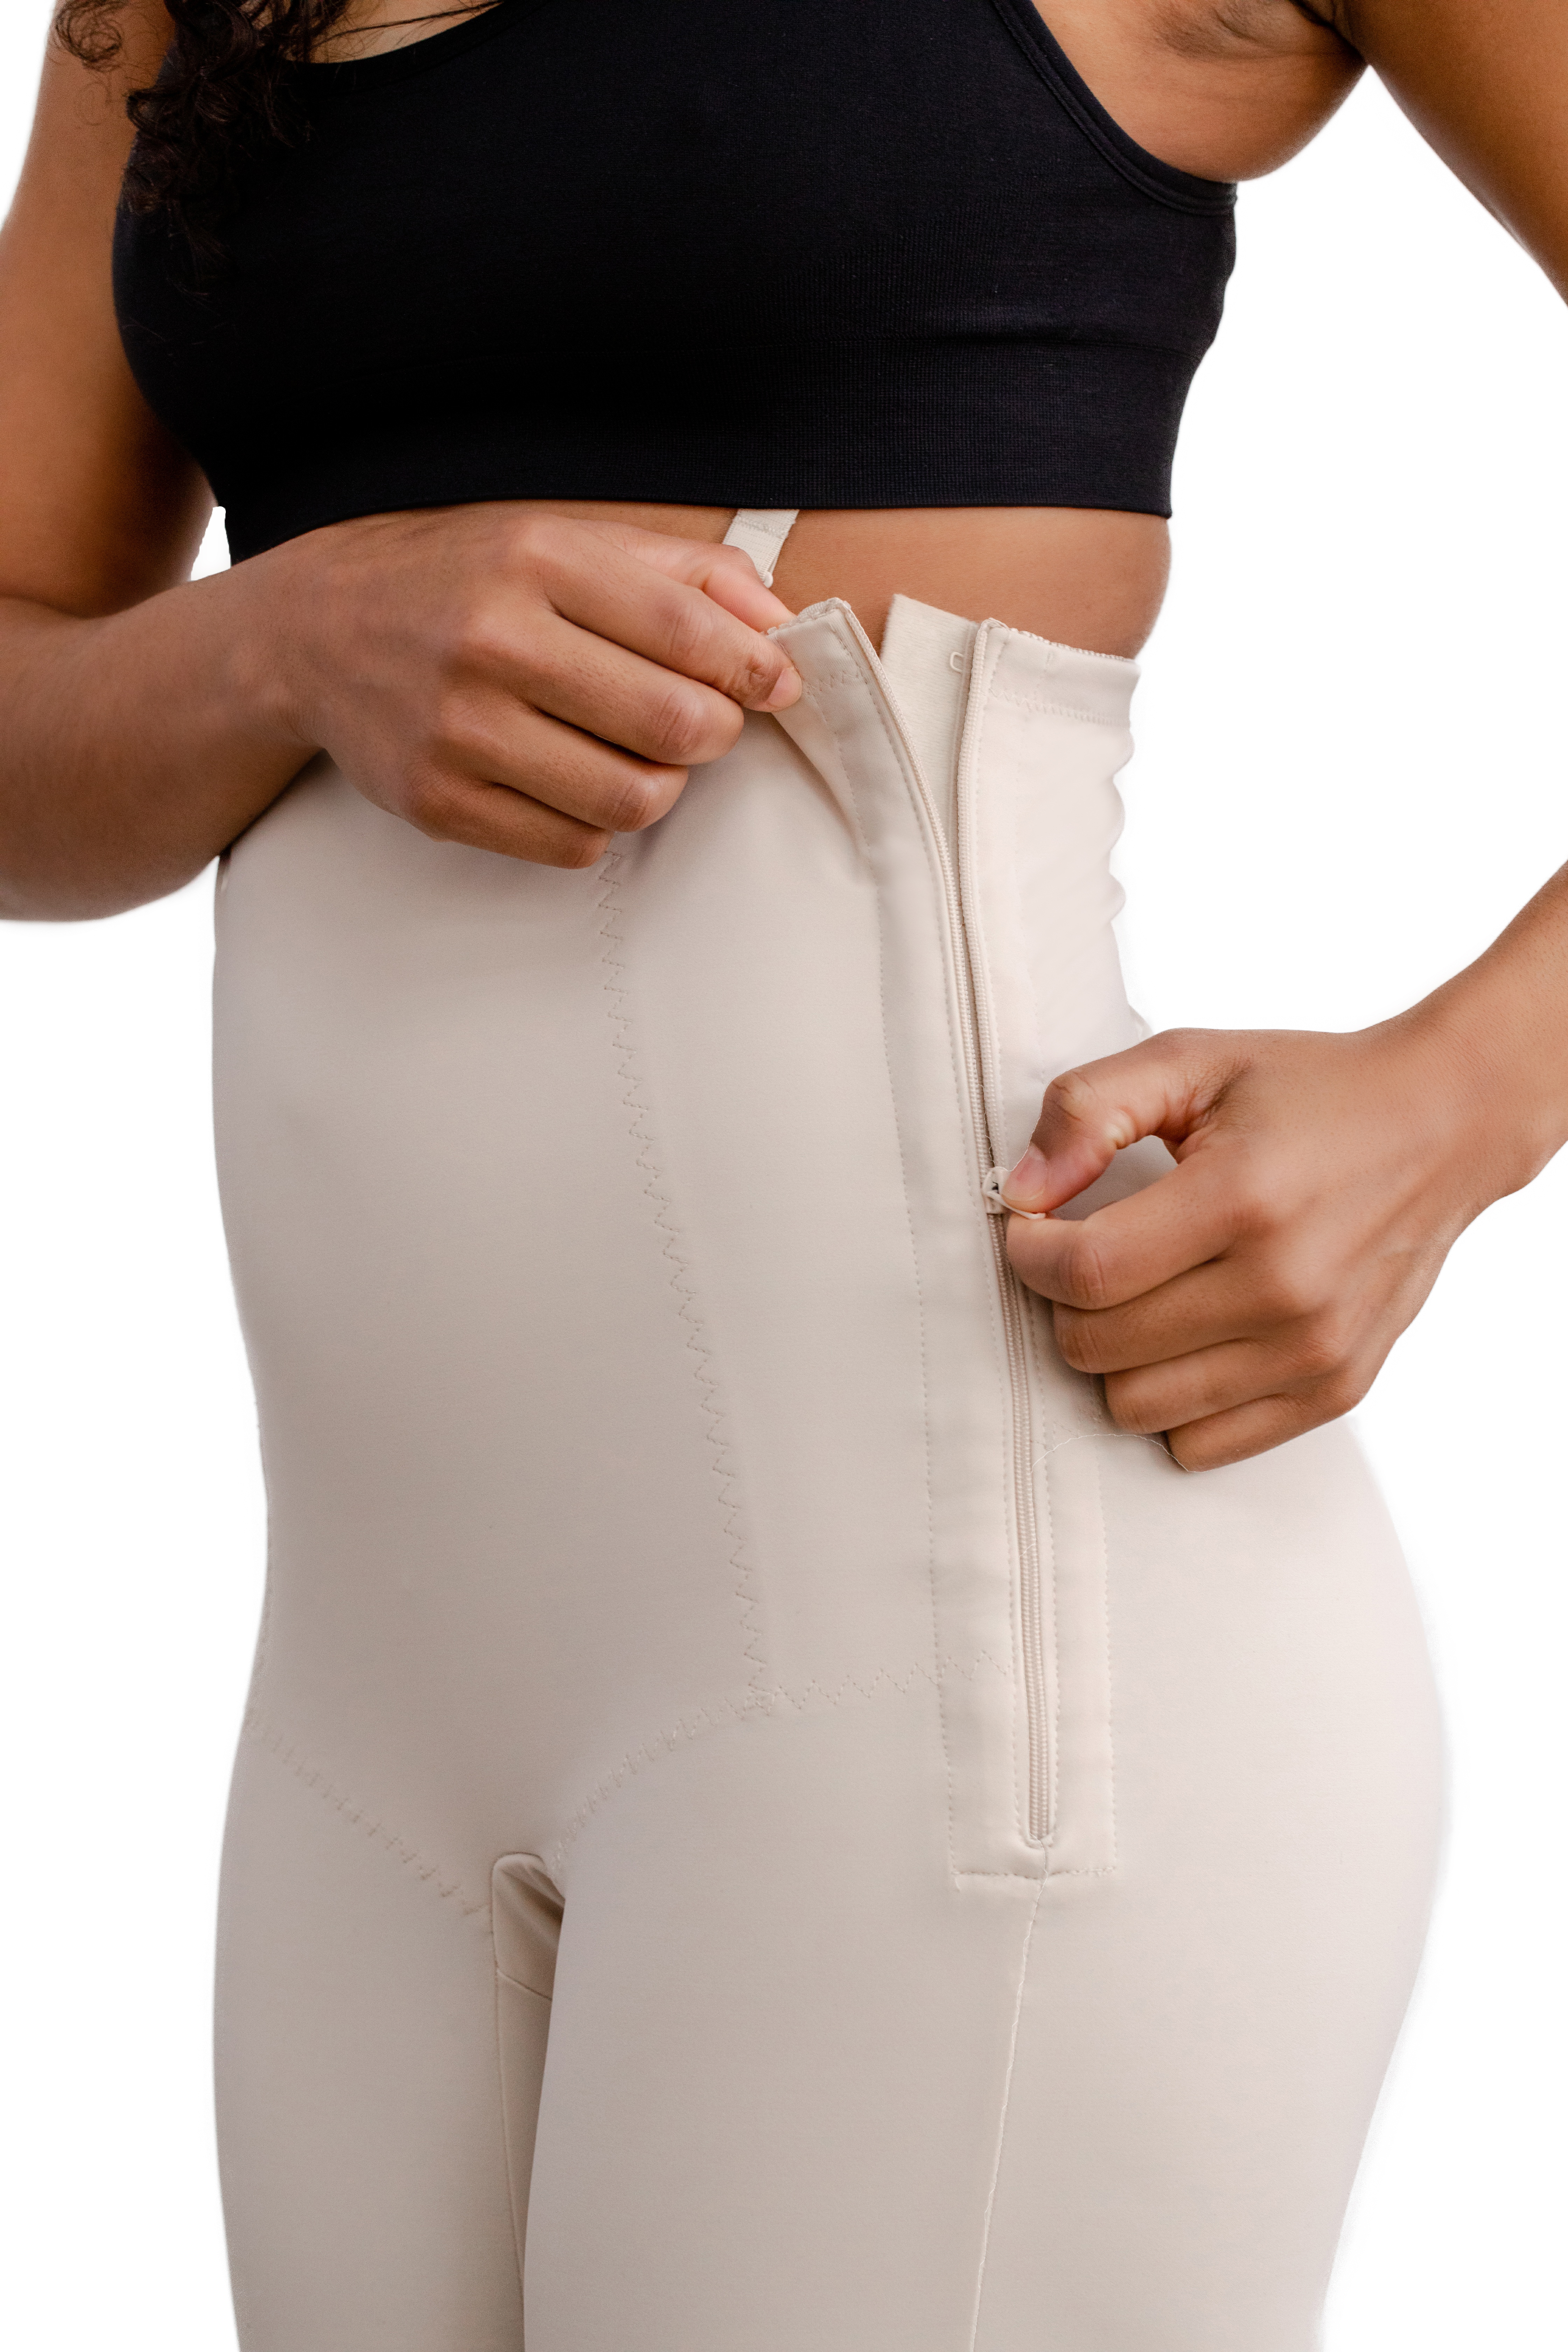 Motif Postpartum Recovery Garment, C-Section & Natural Birth, Nude